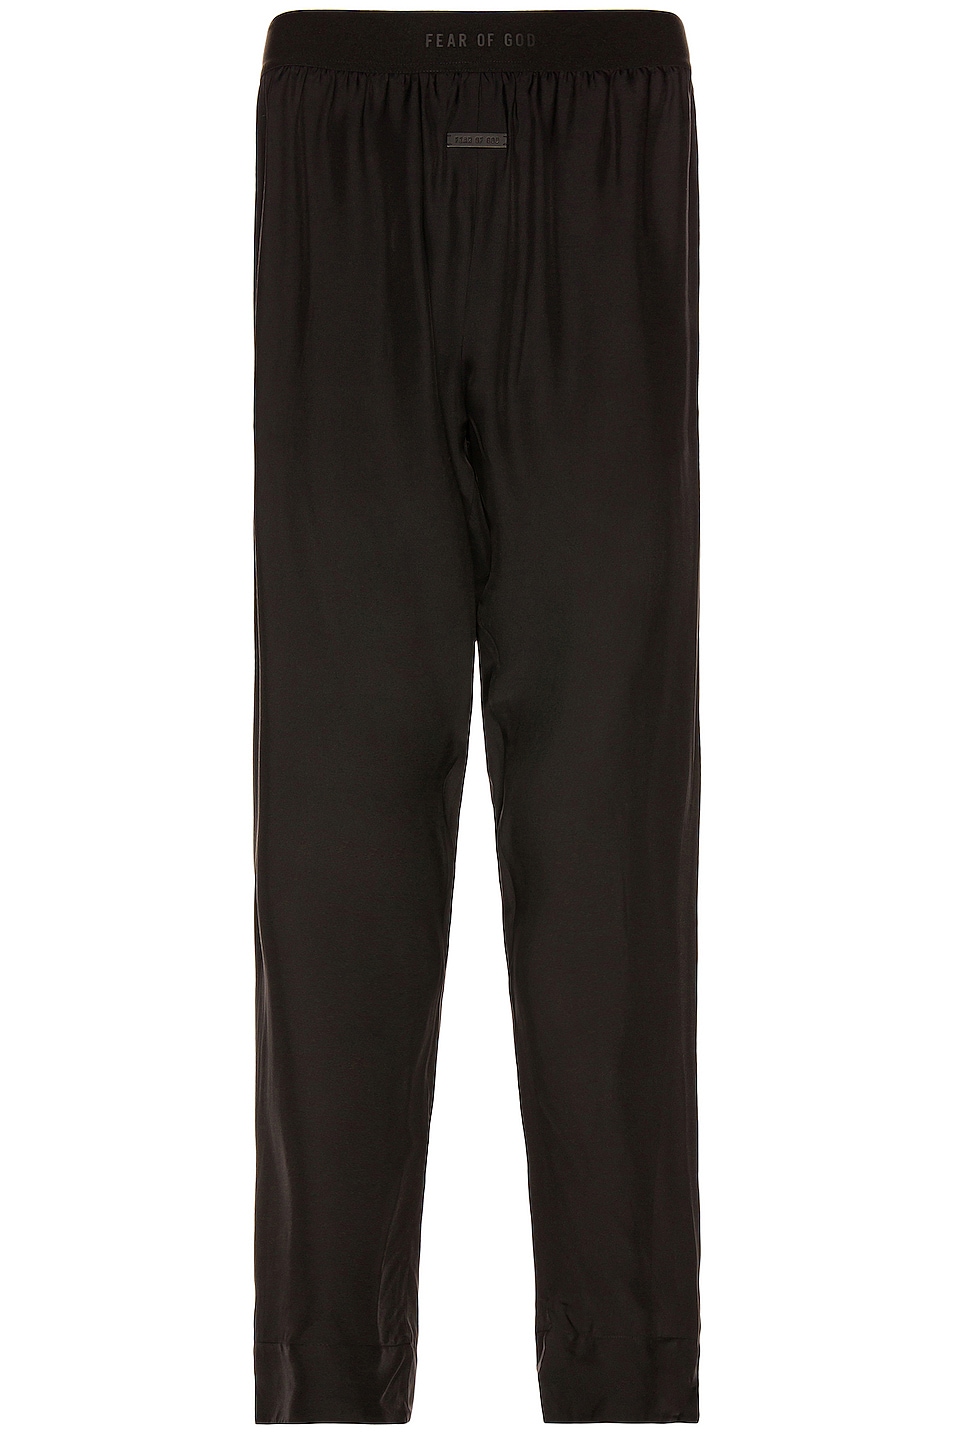 Image 1 of Fear of God Lounge Pant in Black